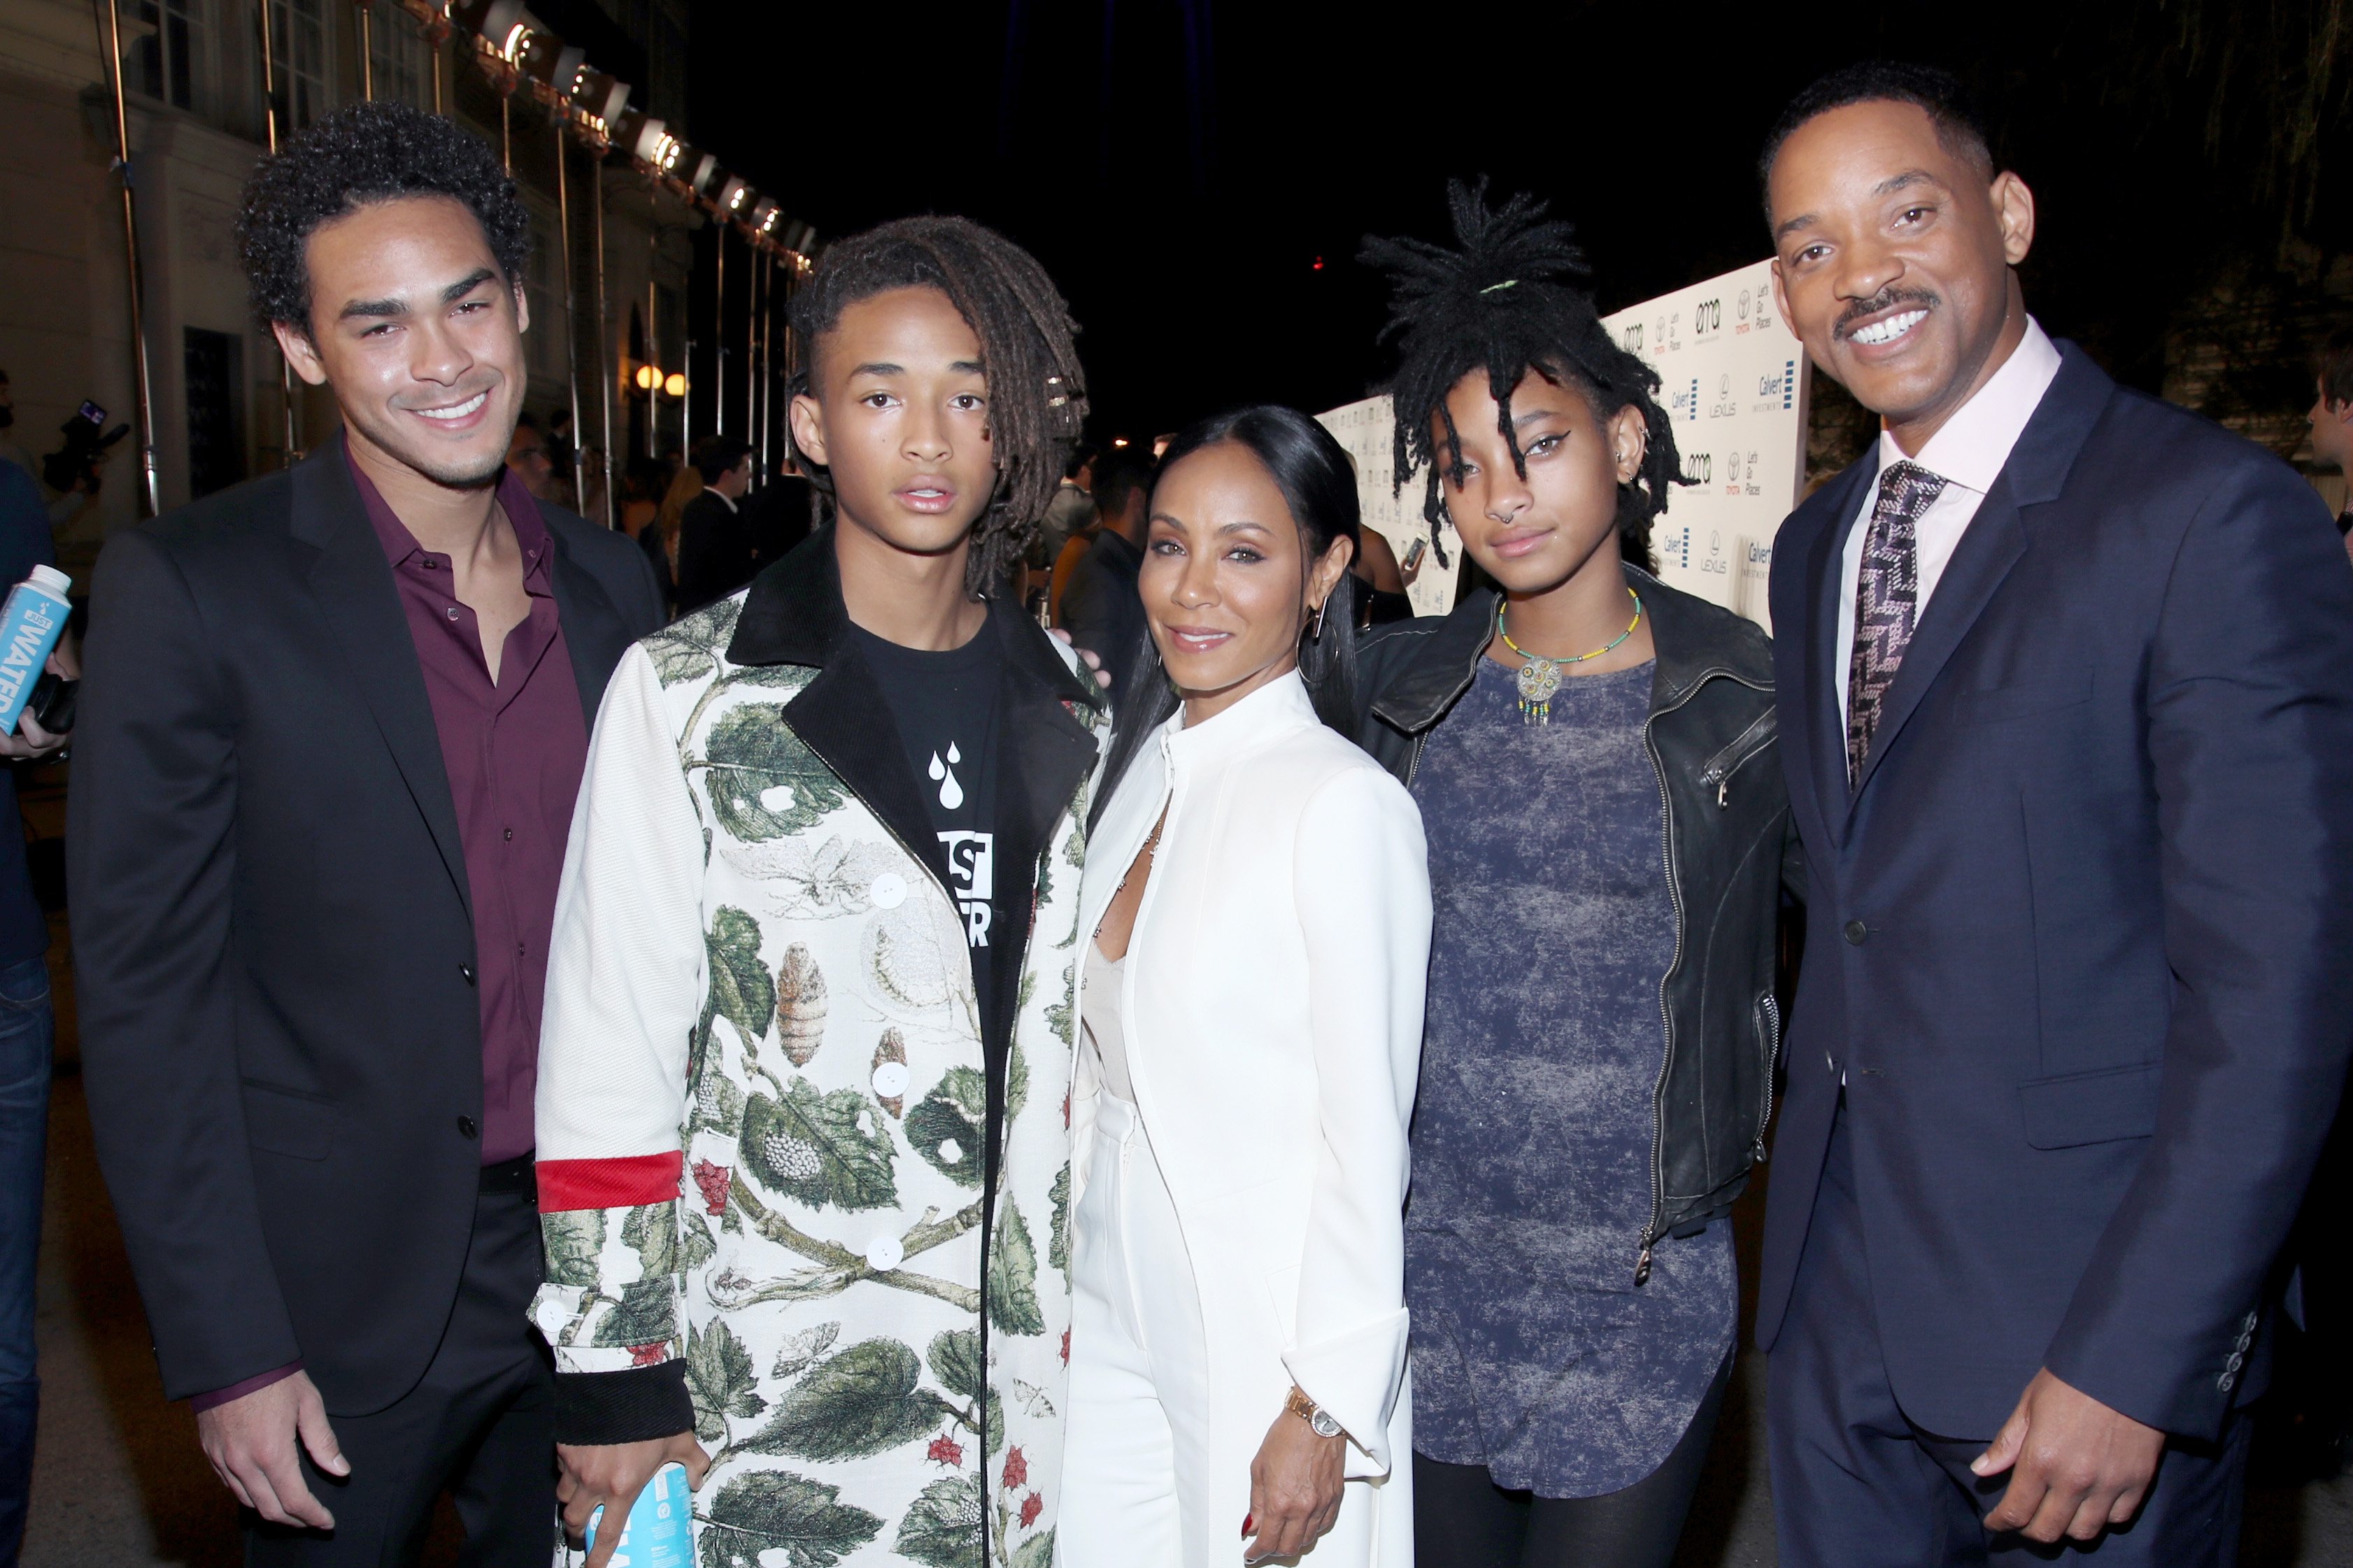 Trey, Jaden, Jada, Willow, and Will at  the Environmental Media Association 26th Annual EMA Awards on October 22, 2016 | Source: Getty Images